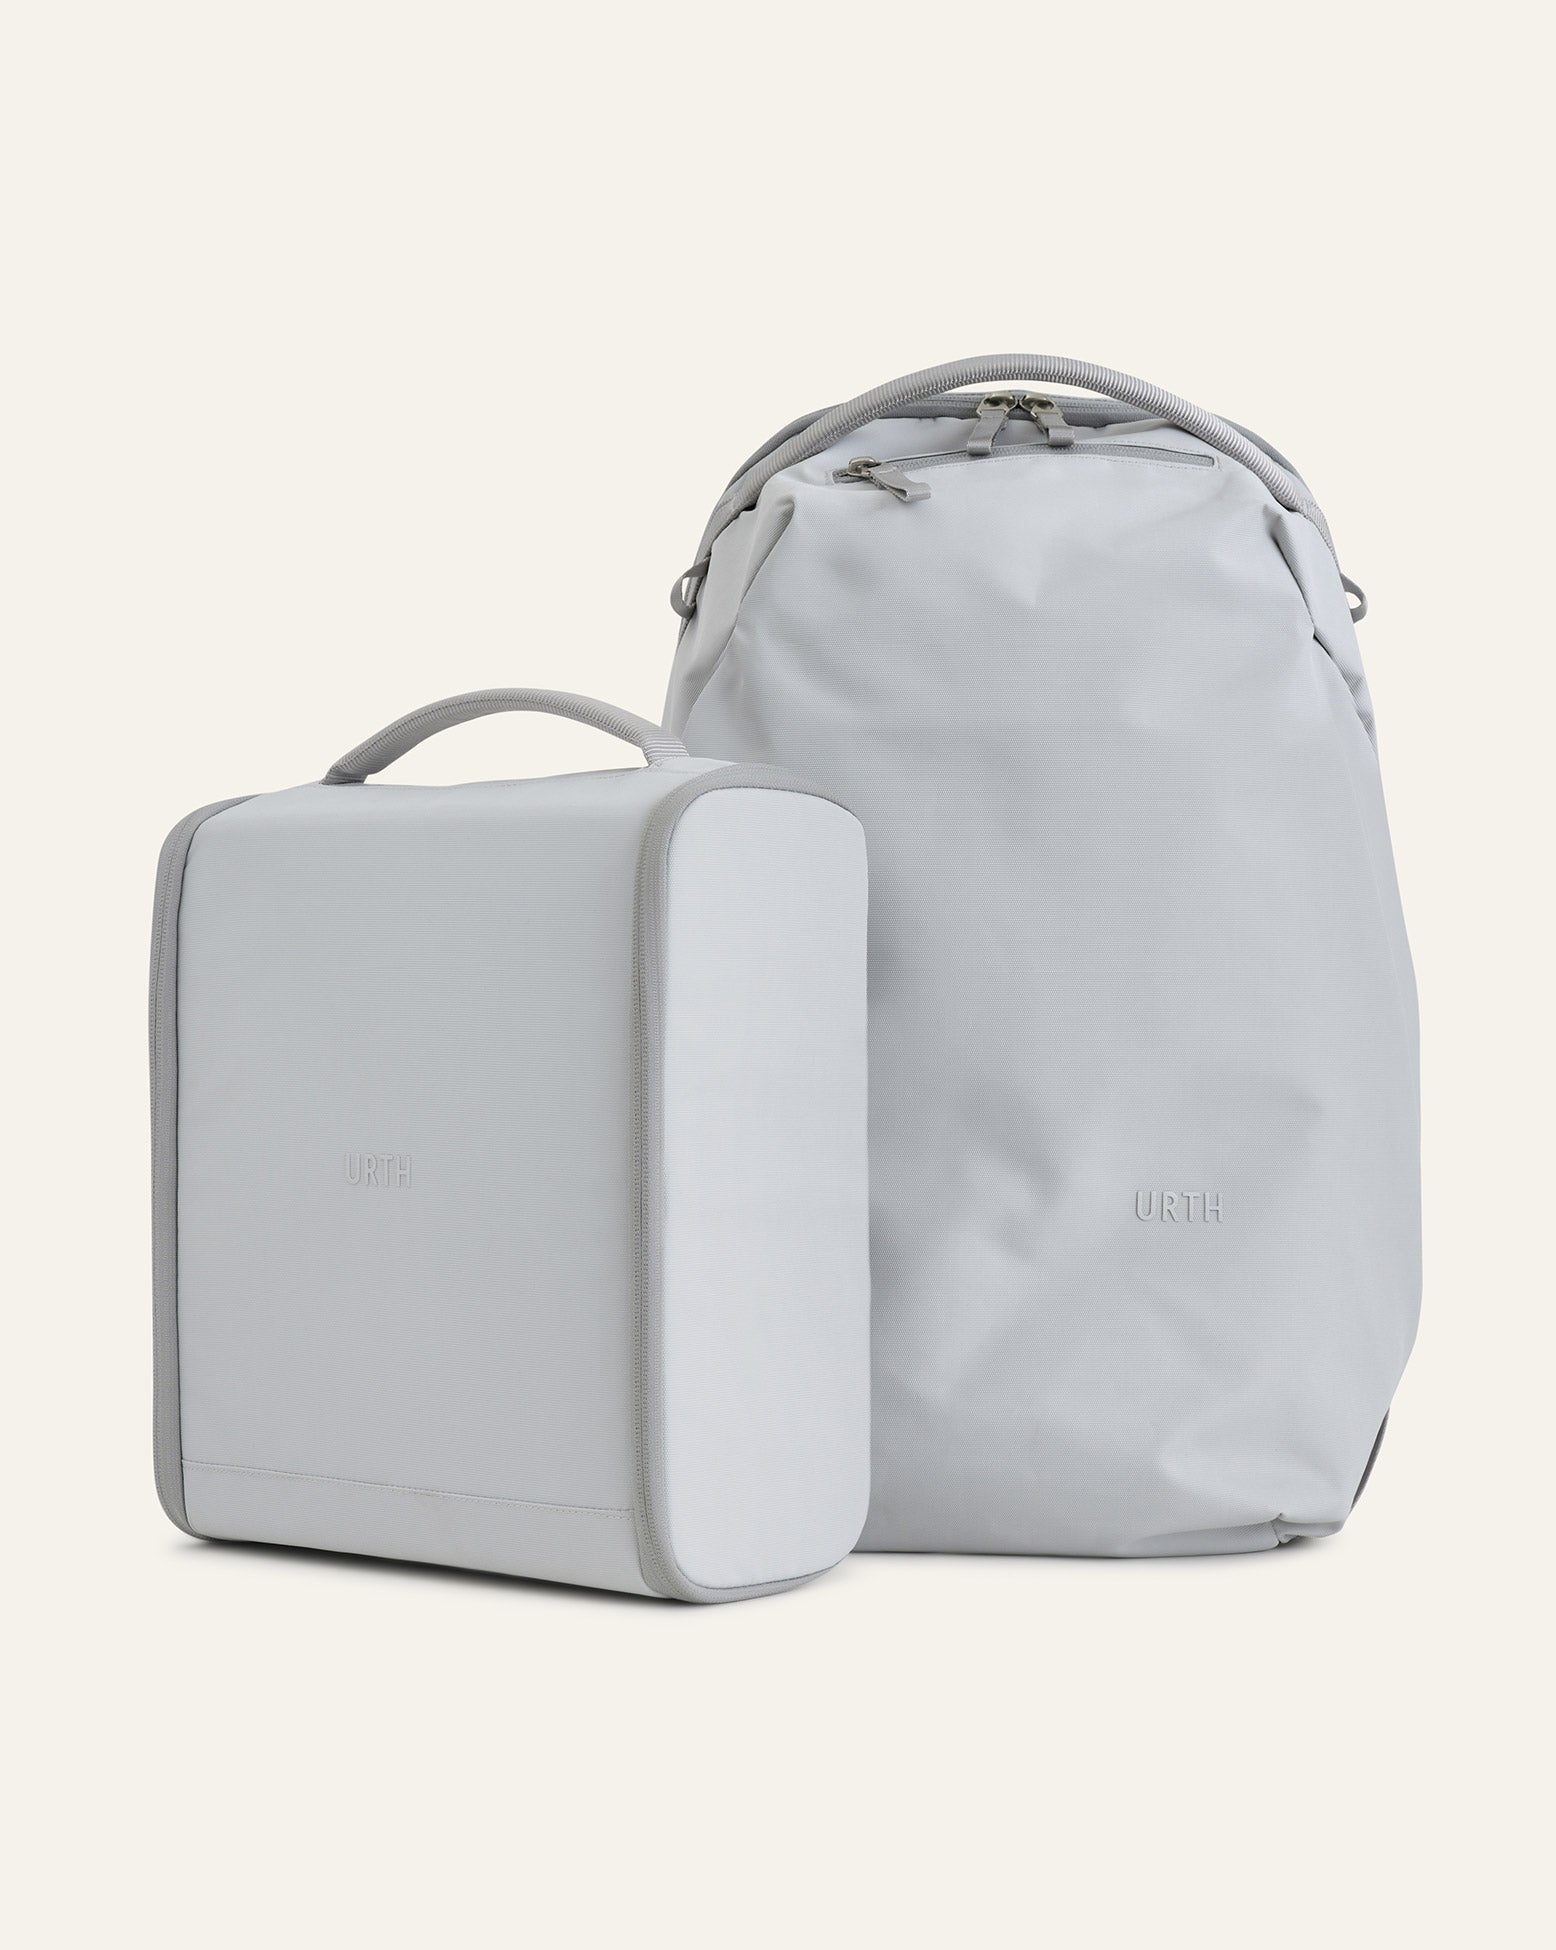 Multifunctional Bags for Everyday Use from Miniso